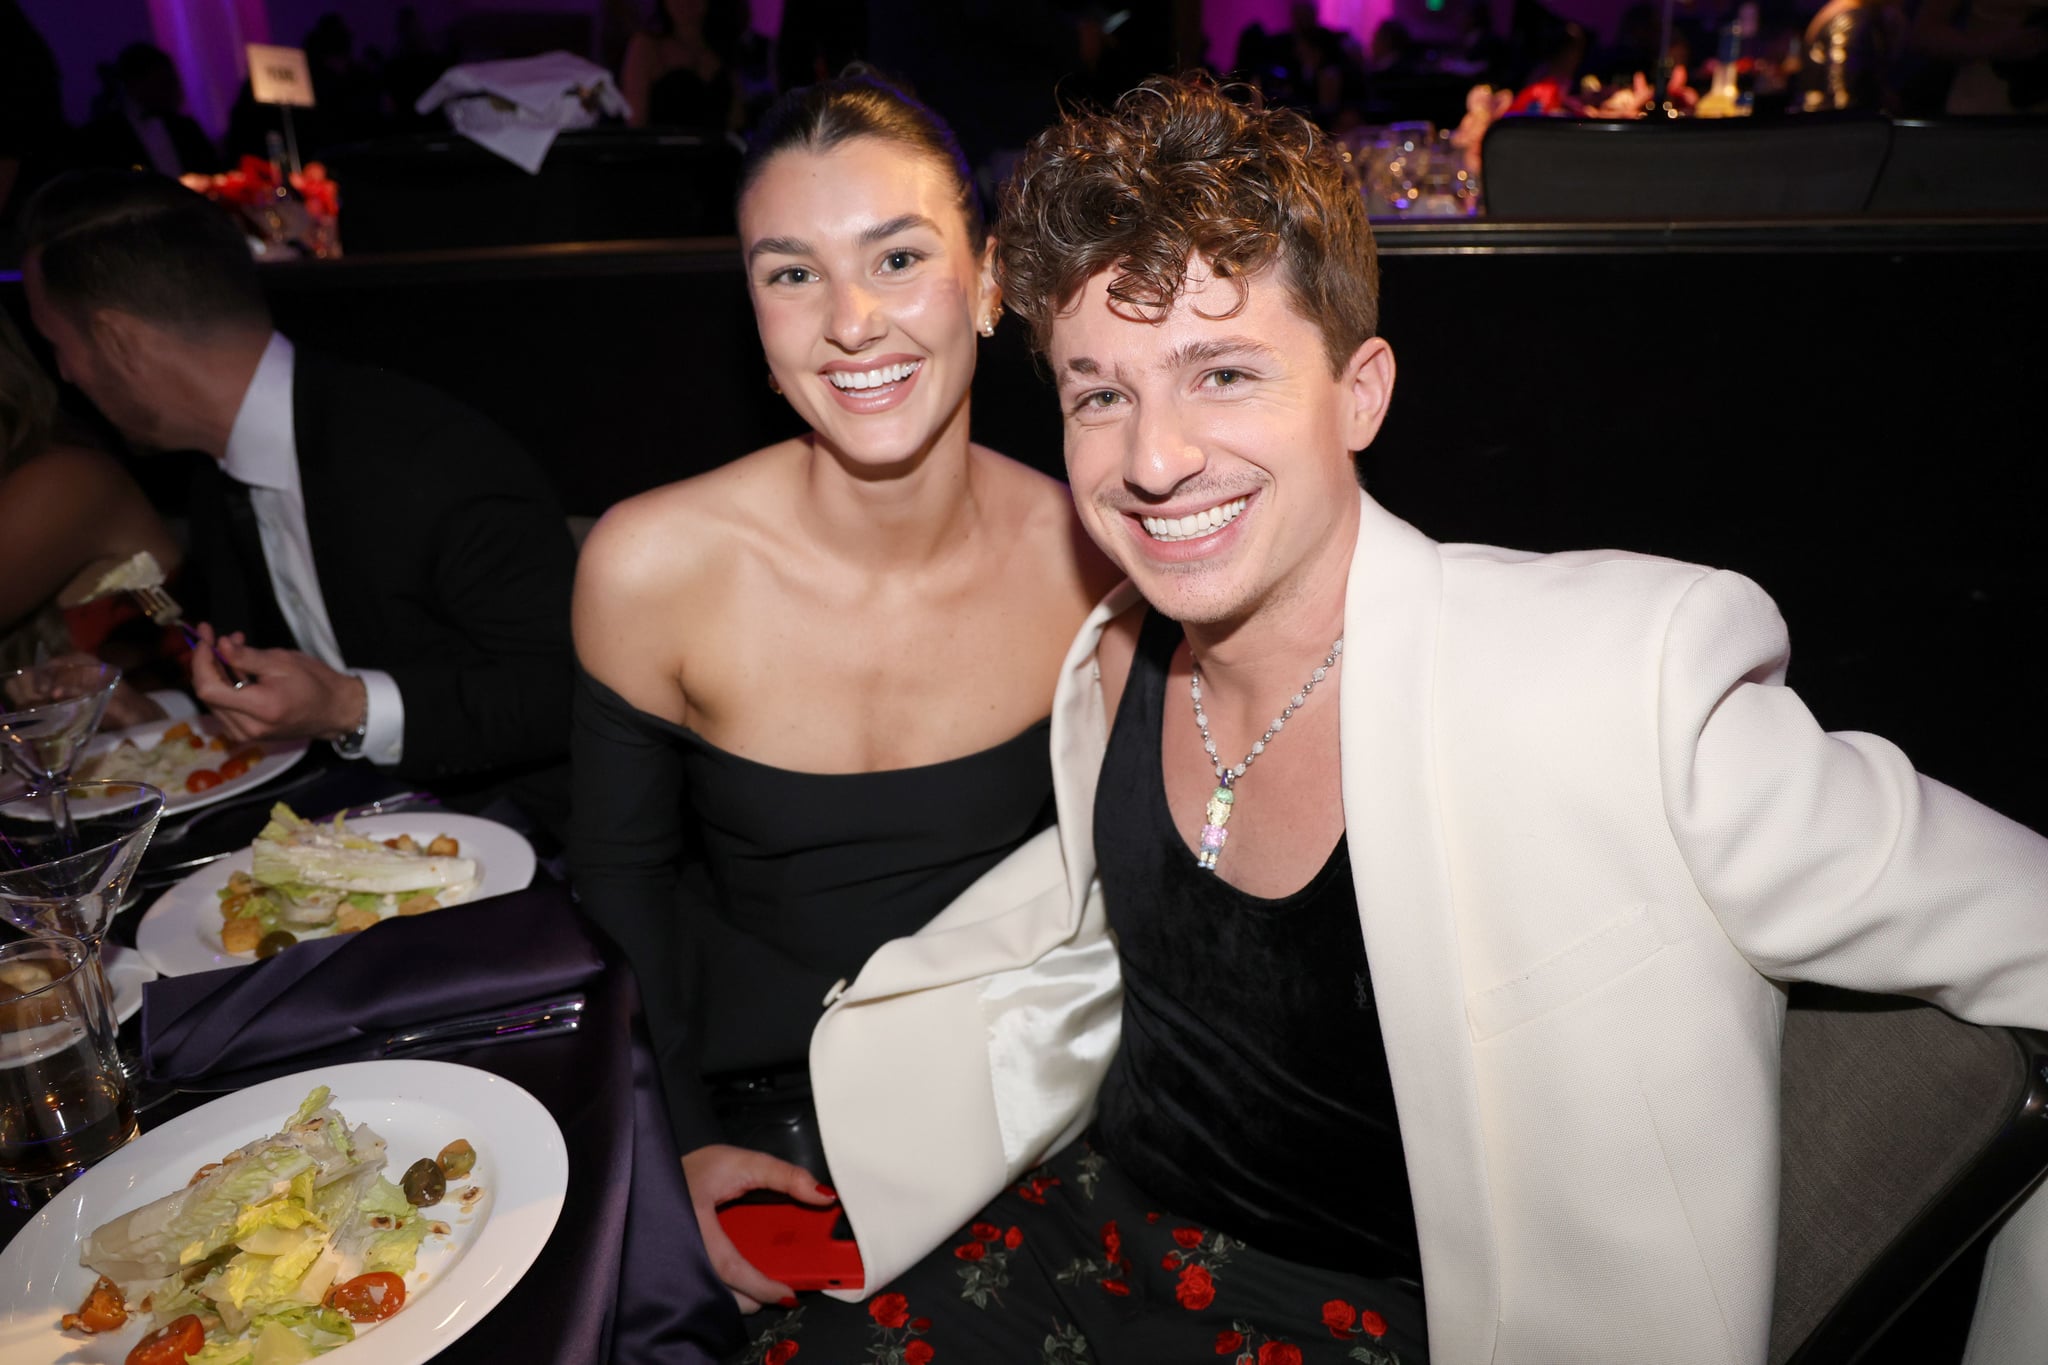 LOS ANGELES, CALIFORNIA - FEBRUARY 04: (L-R) Brooke Sansone and Charlie Puth attend the Pre-GRAMMY Gala & GRAMMY Salute to Industry Icons Honouring Julie Greenwald and Craig Kallman on February 04, 2023 in Los Angeles, California. (Photo by Johnny Nunez/Getty Images for The Recording Academy)